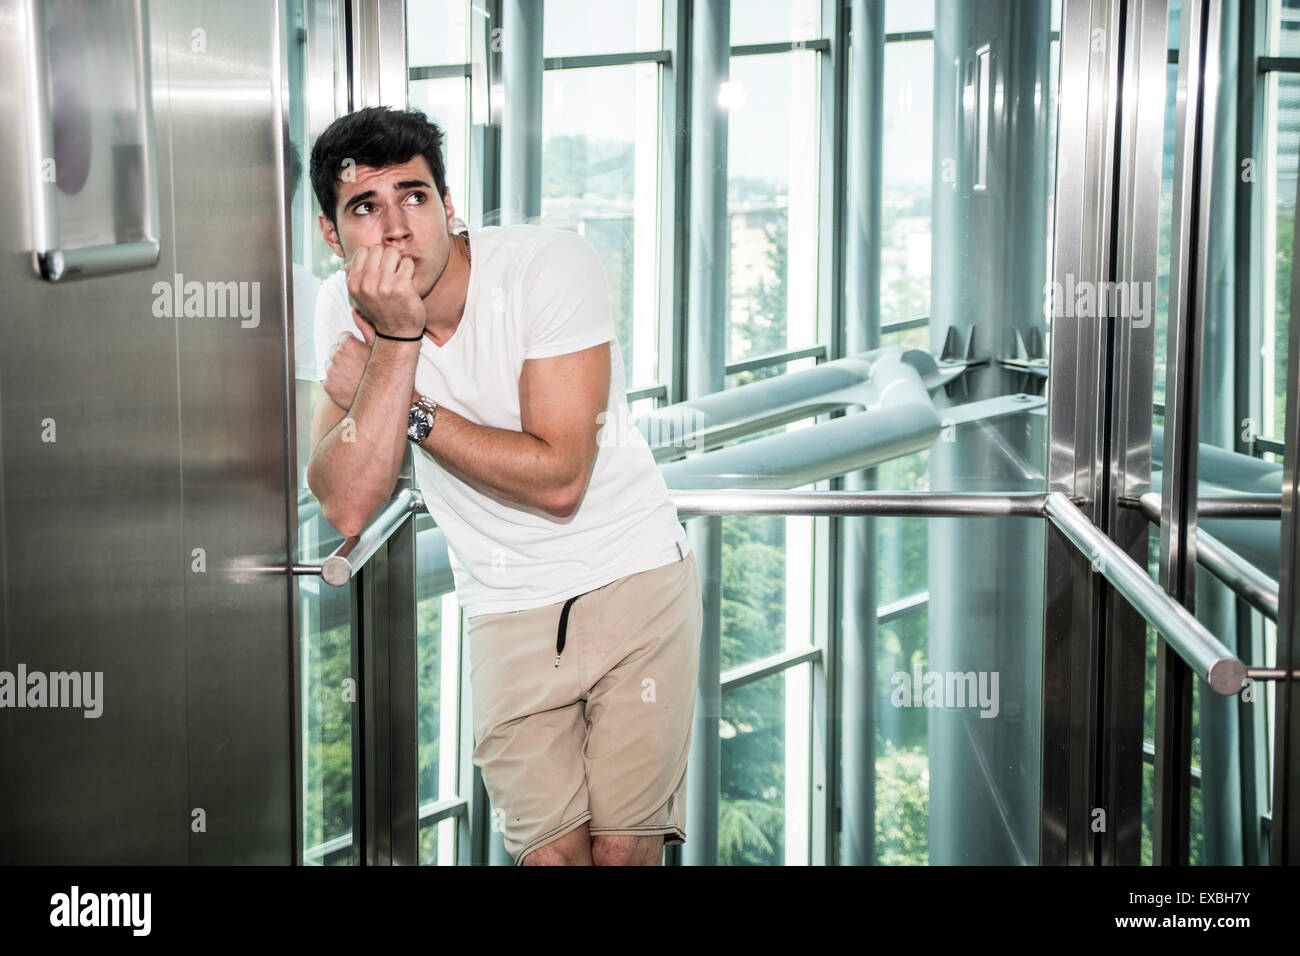 Scared young man desperate in stuck elevator screaming, looking very upset Stock Photo